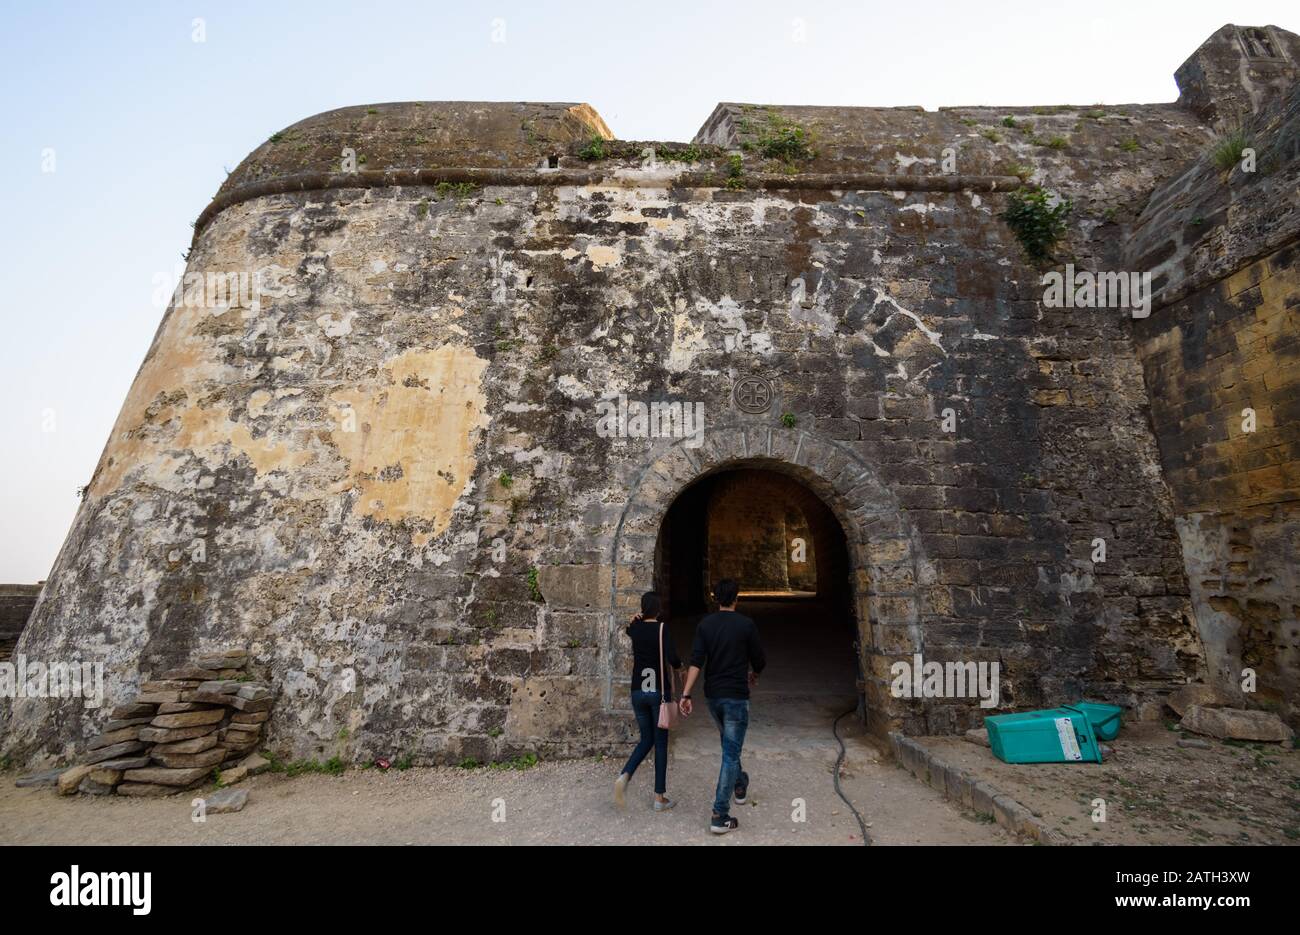 Diu, India - December 2018: The exterior facade of one of the gateways to the ancient Portuguese built fort in the island of Diu. Stock Photo